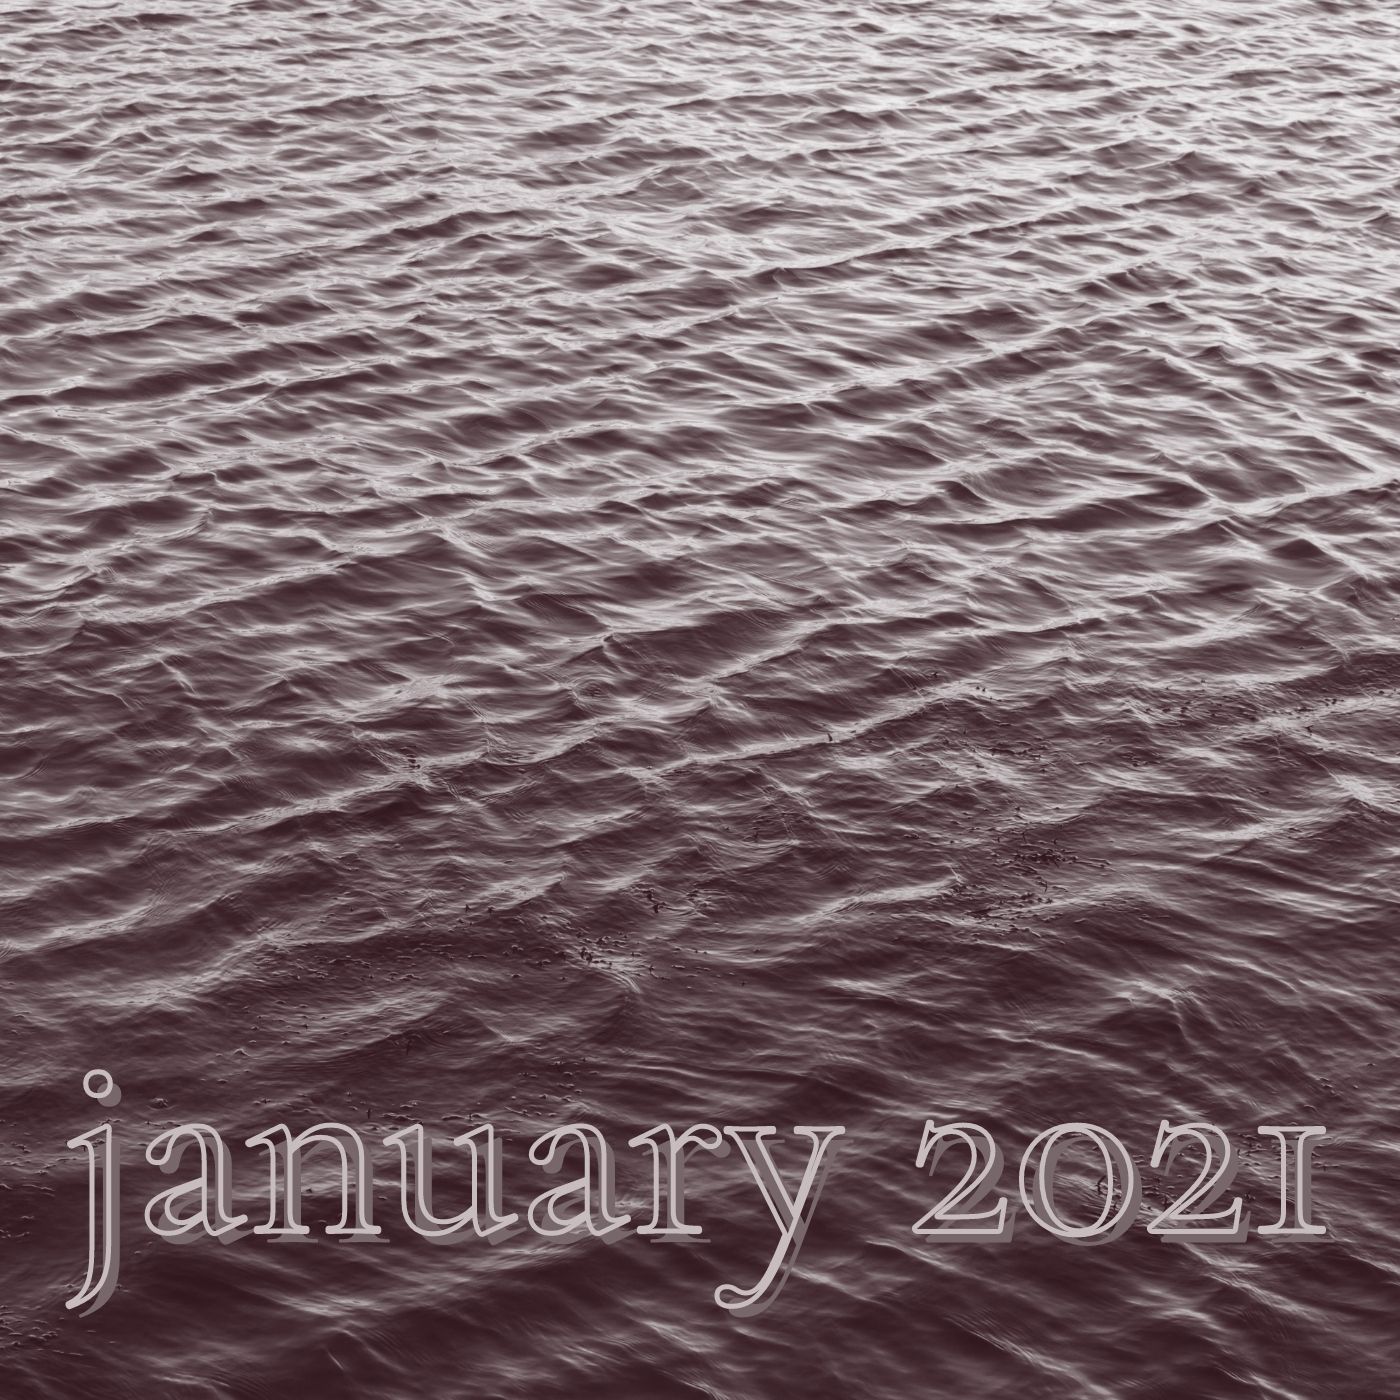 a square image of rippling water in purple tones reading january 2021 at the bottom